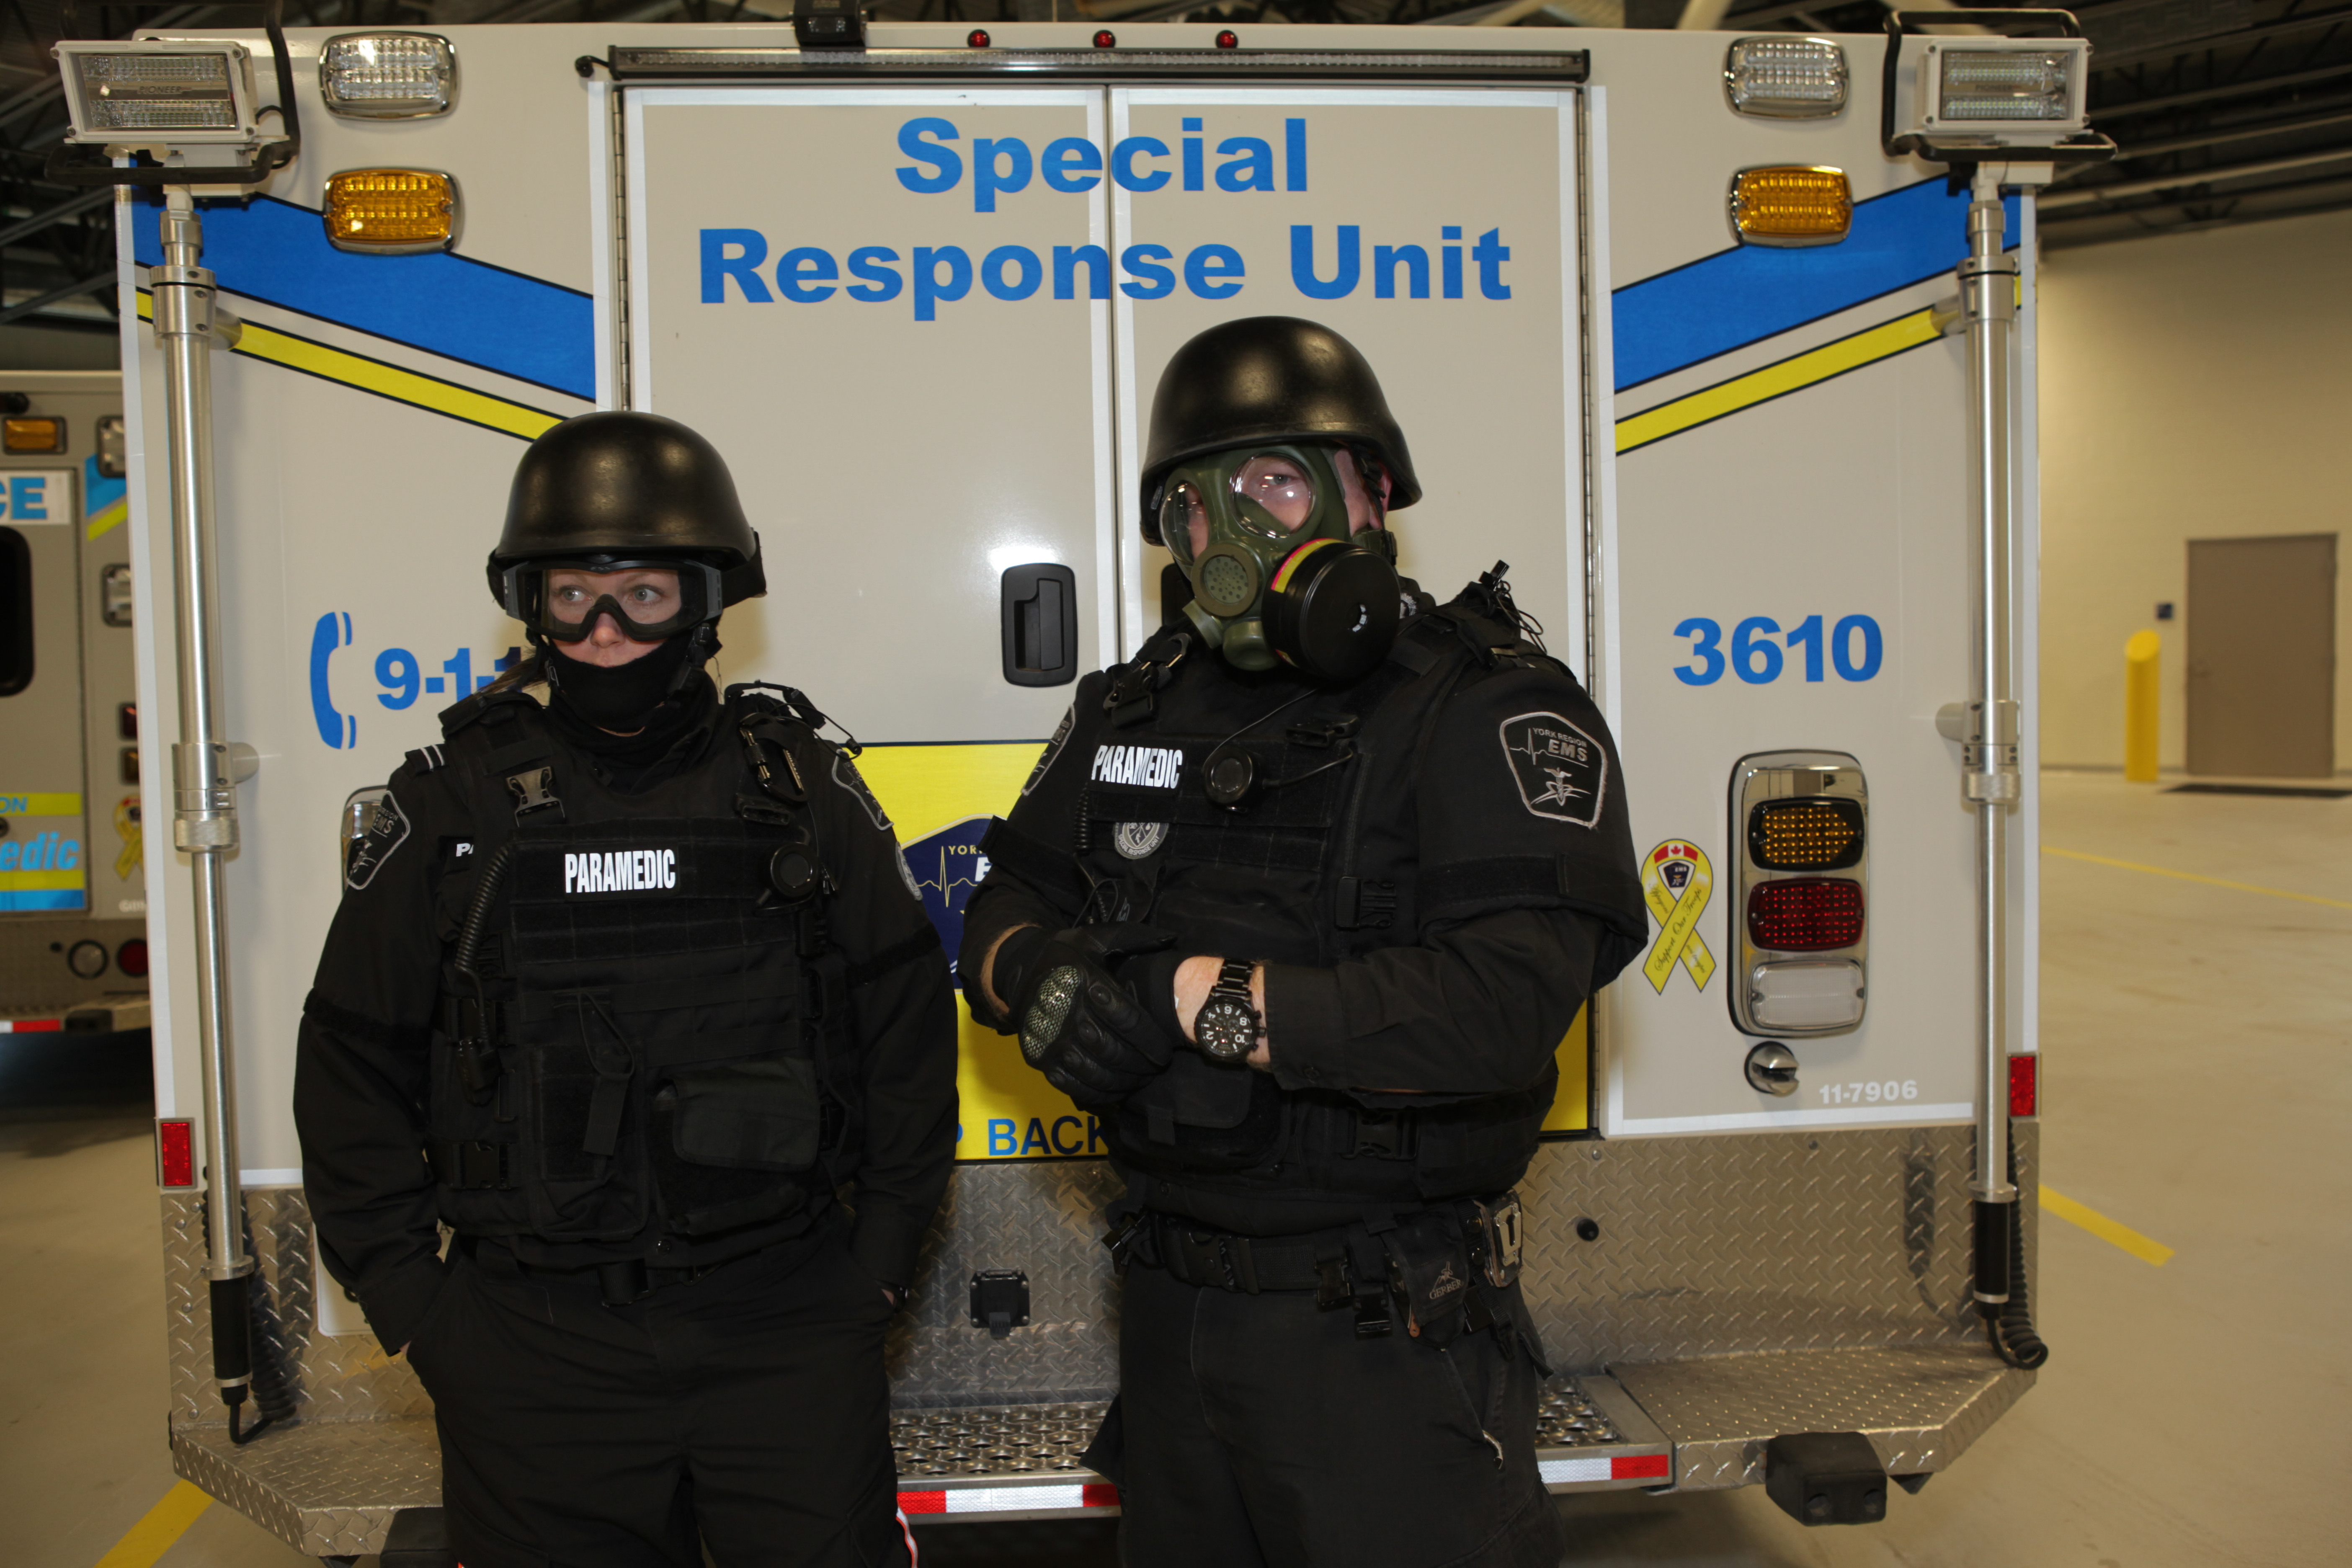 Two paramedics wearing special tactical gear in front of an ambulance with the words "Special Response Unit"